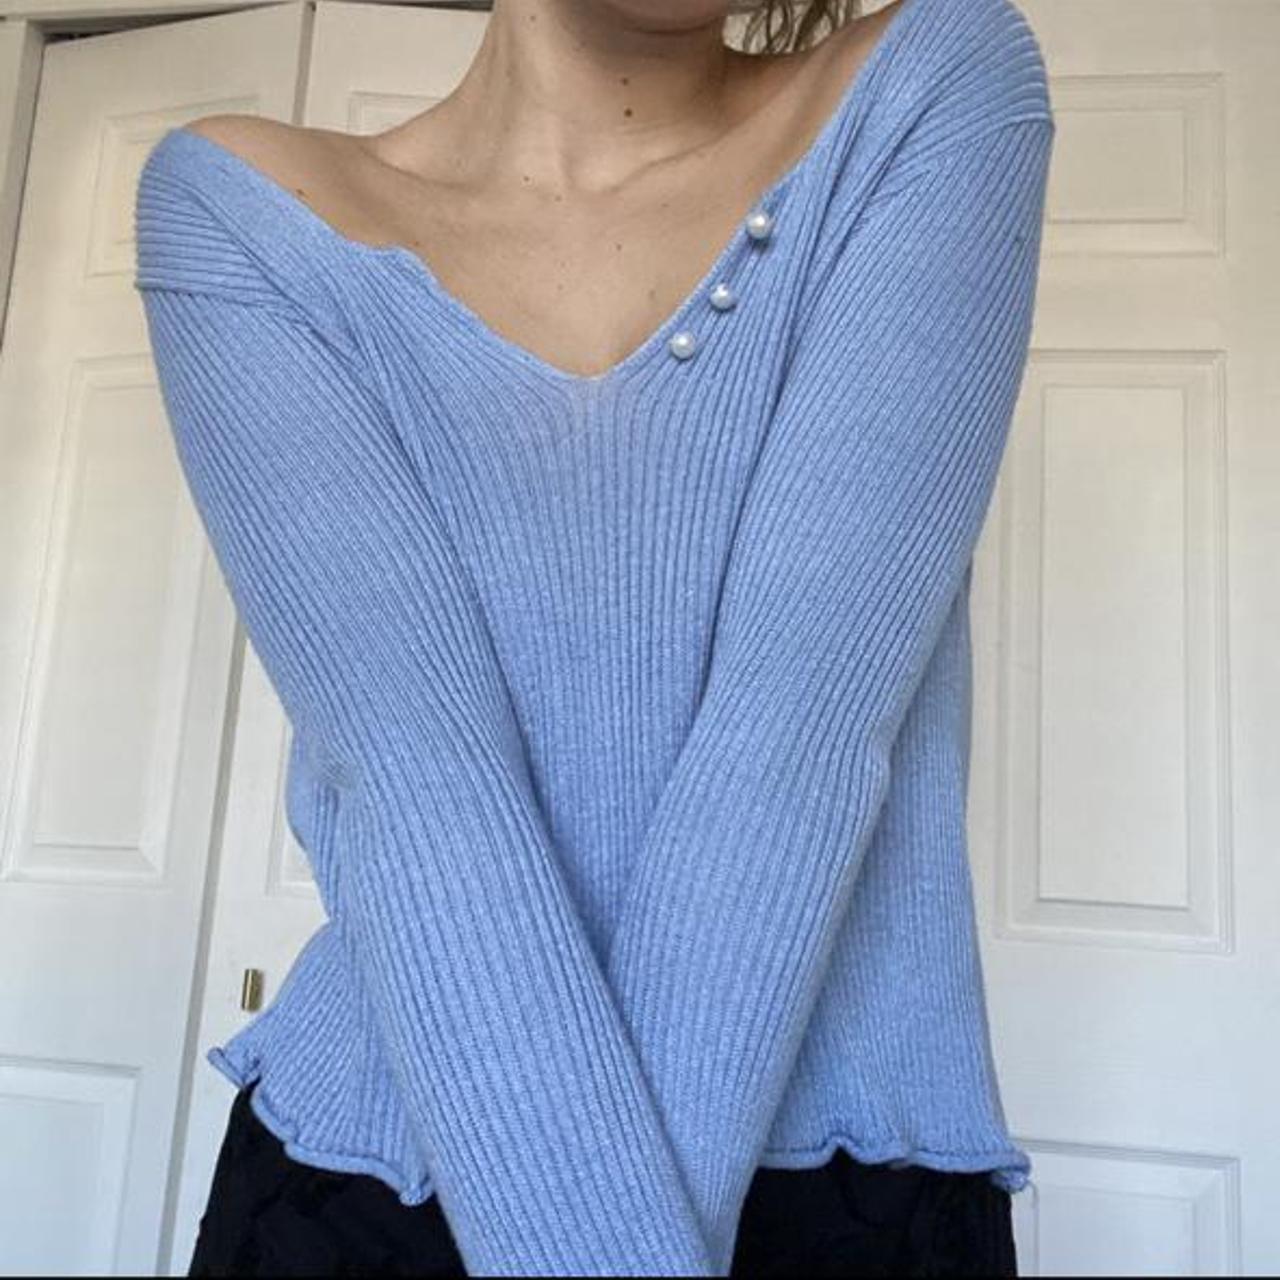 Product Image 1 - Blue longsleeve knit top 
From